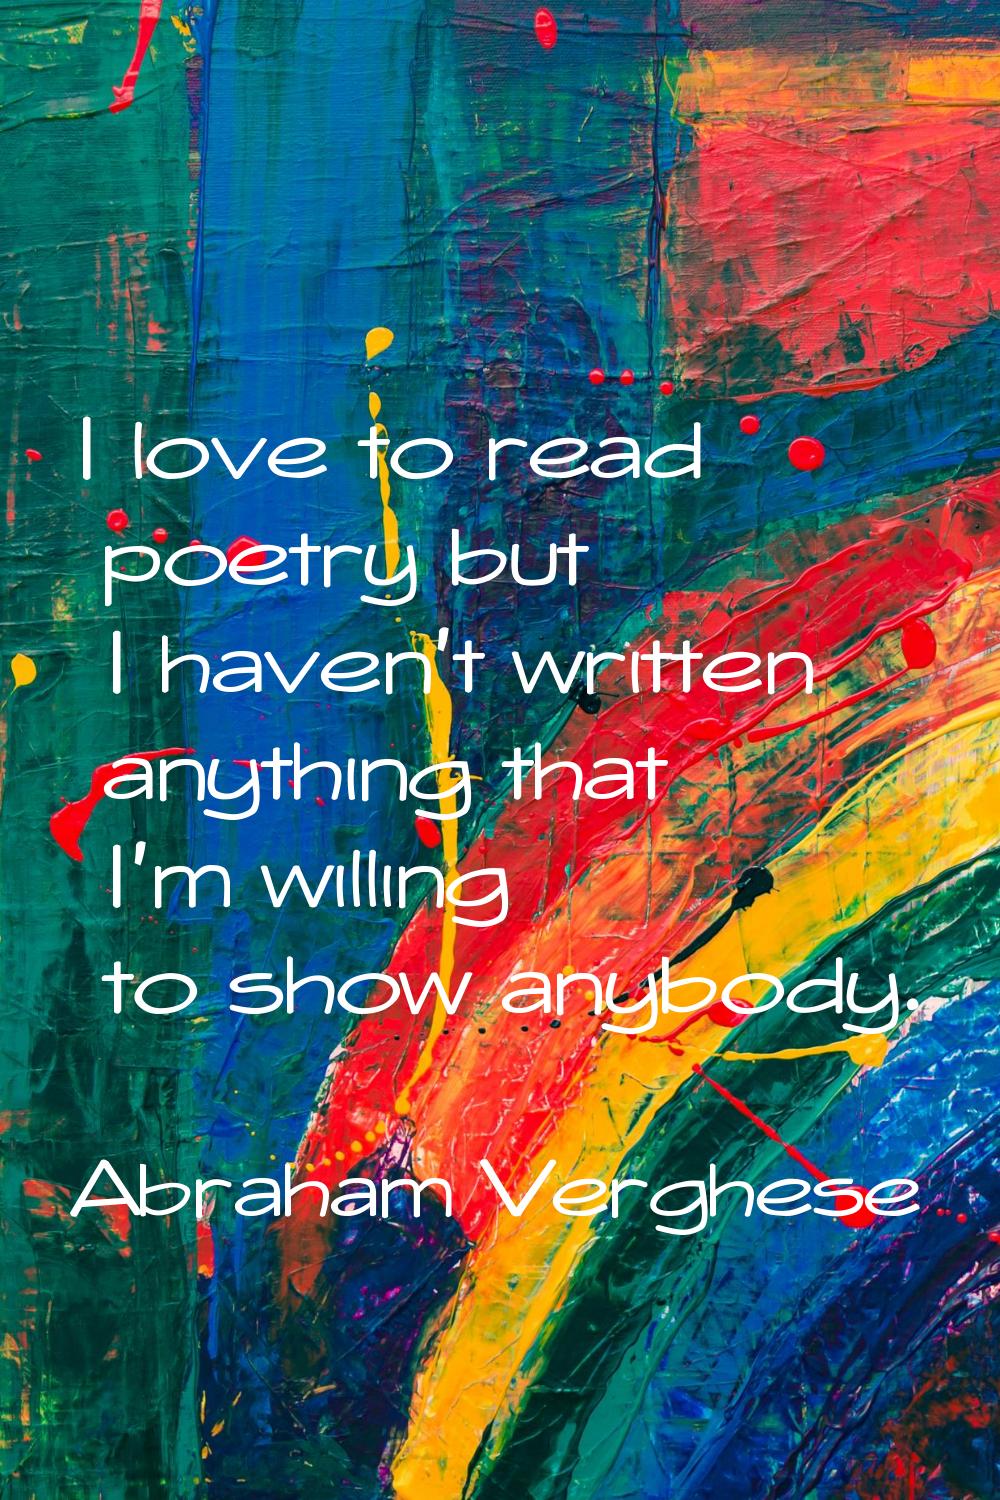 I love to read poetry but I haven't written anything that I'm willing to show anybody.